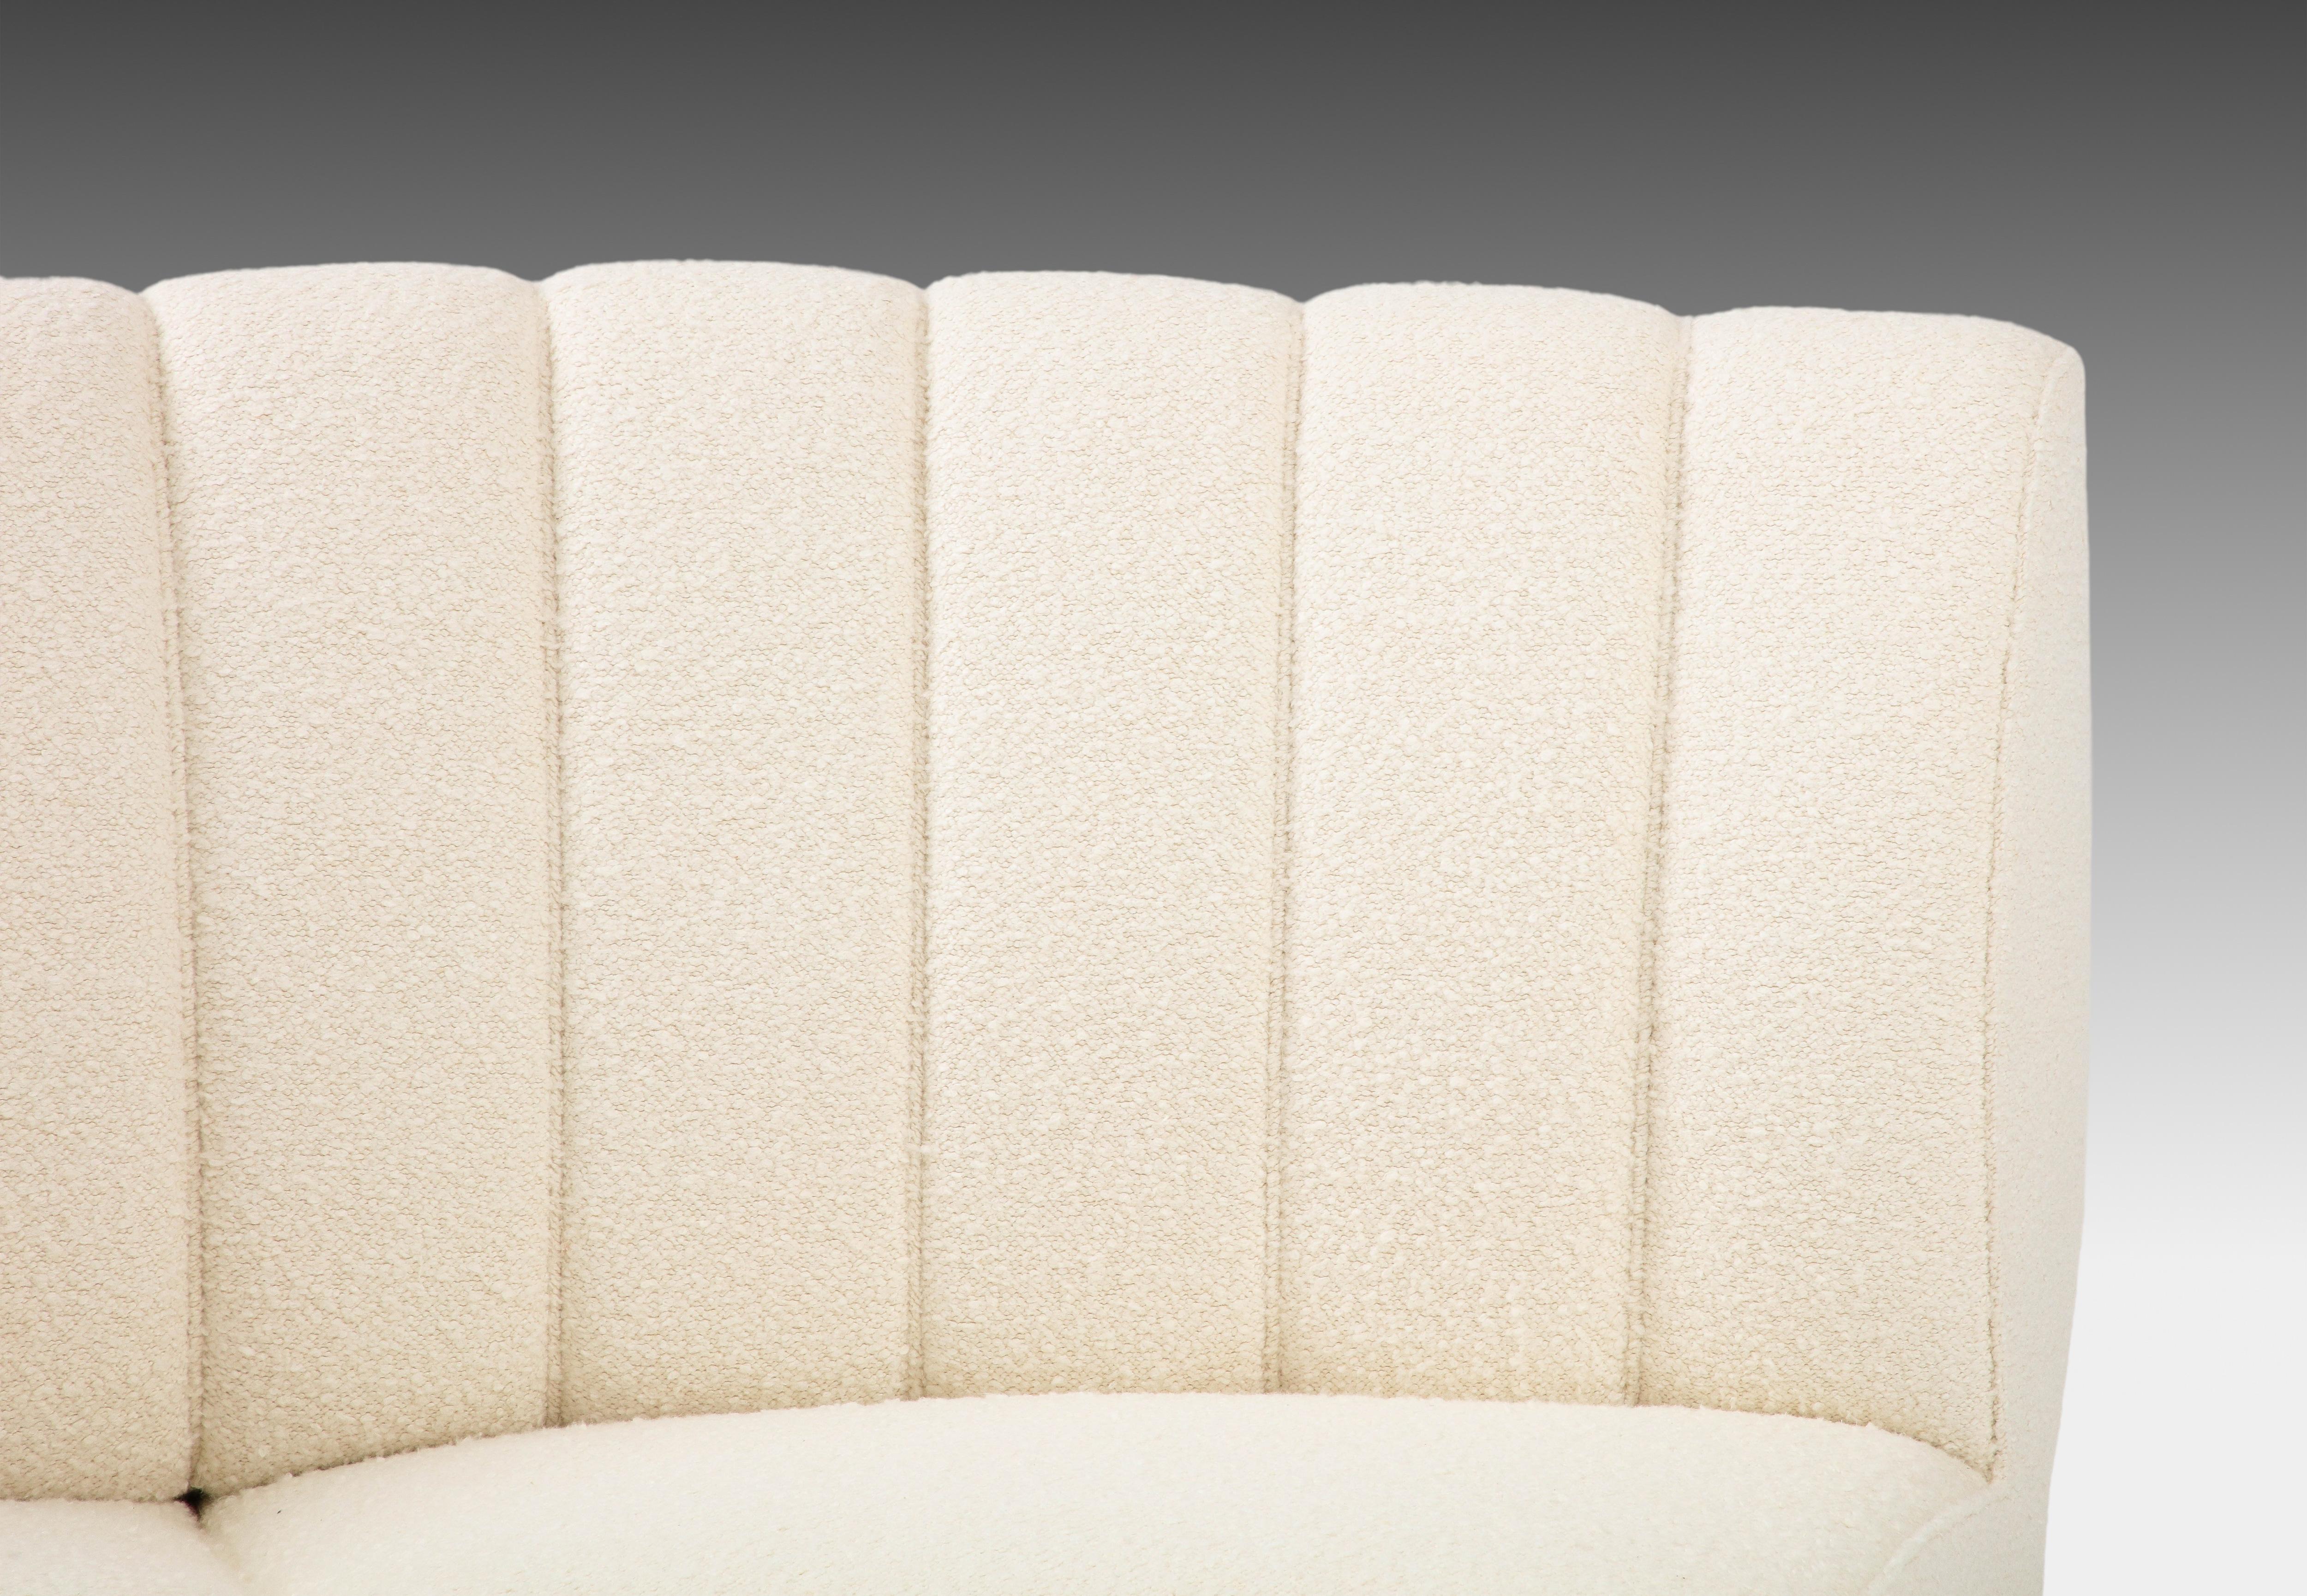 ISA Bergamo Rare Set of Curved Settee and Pair of Lounge Chairs in Ivory Bouclé For Sale 5